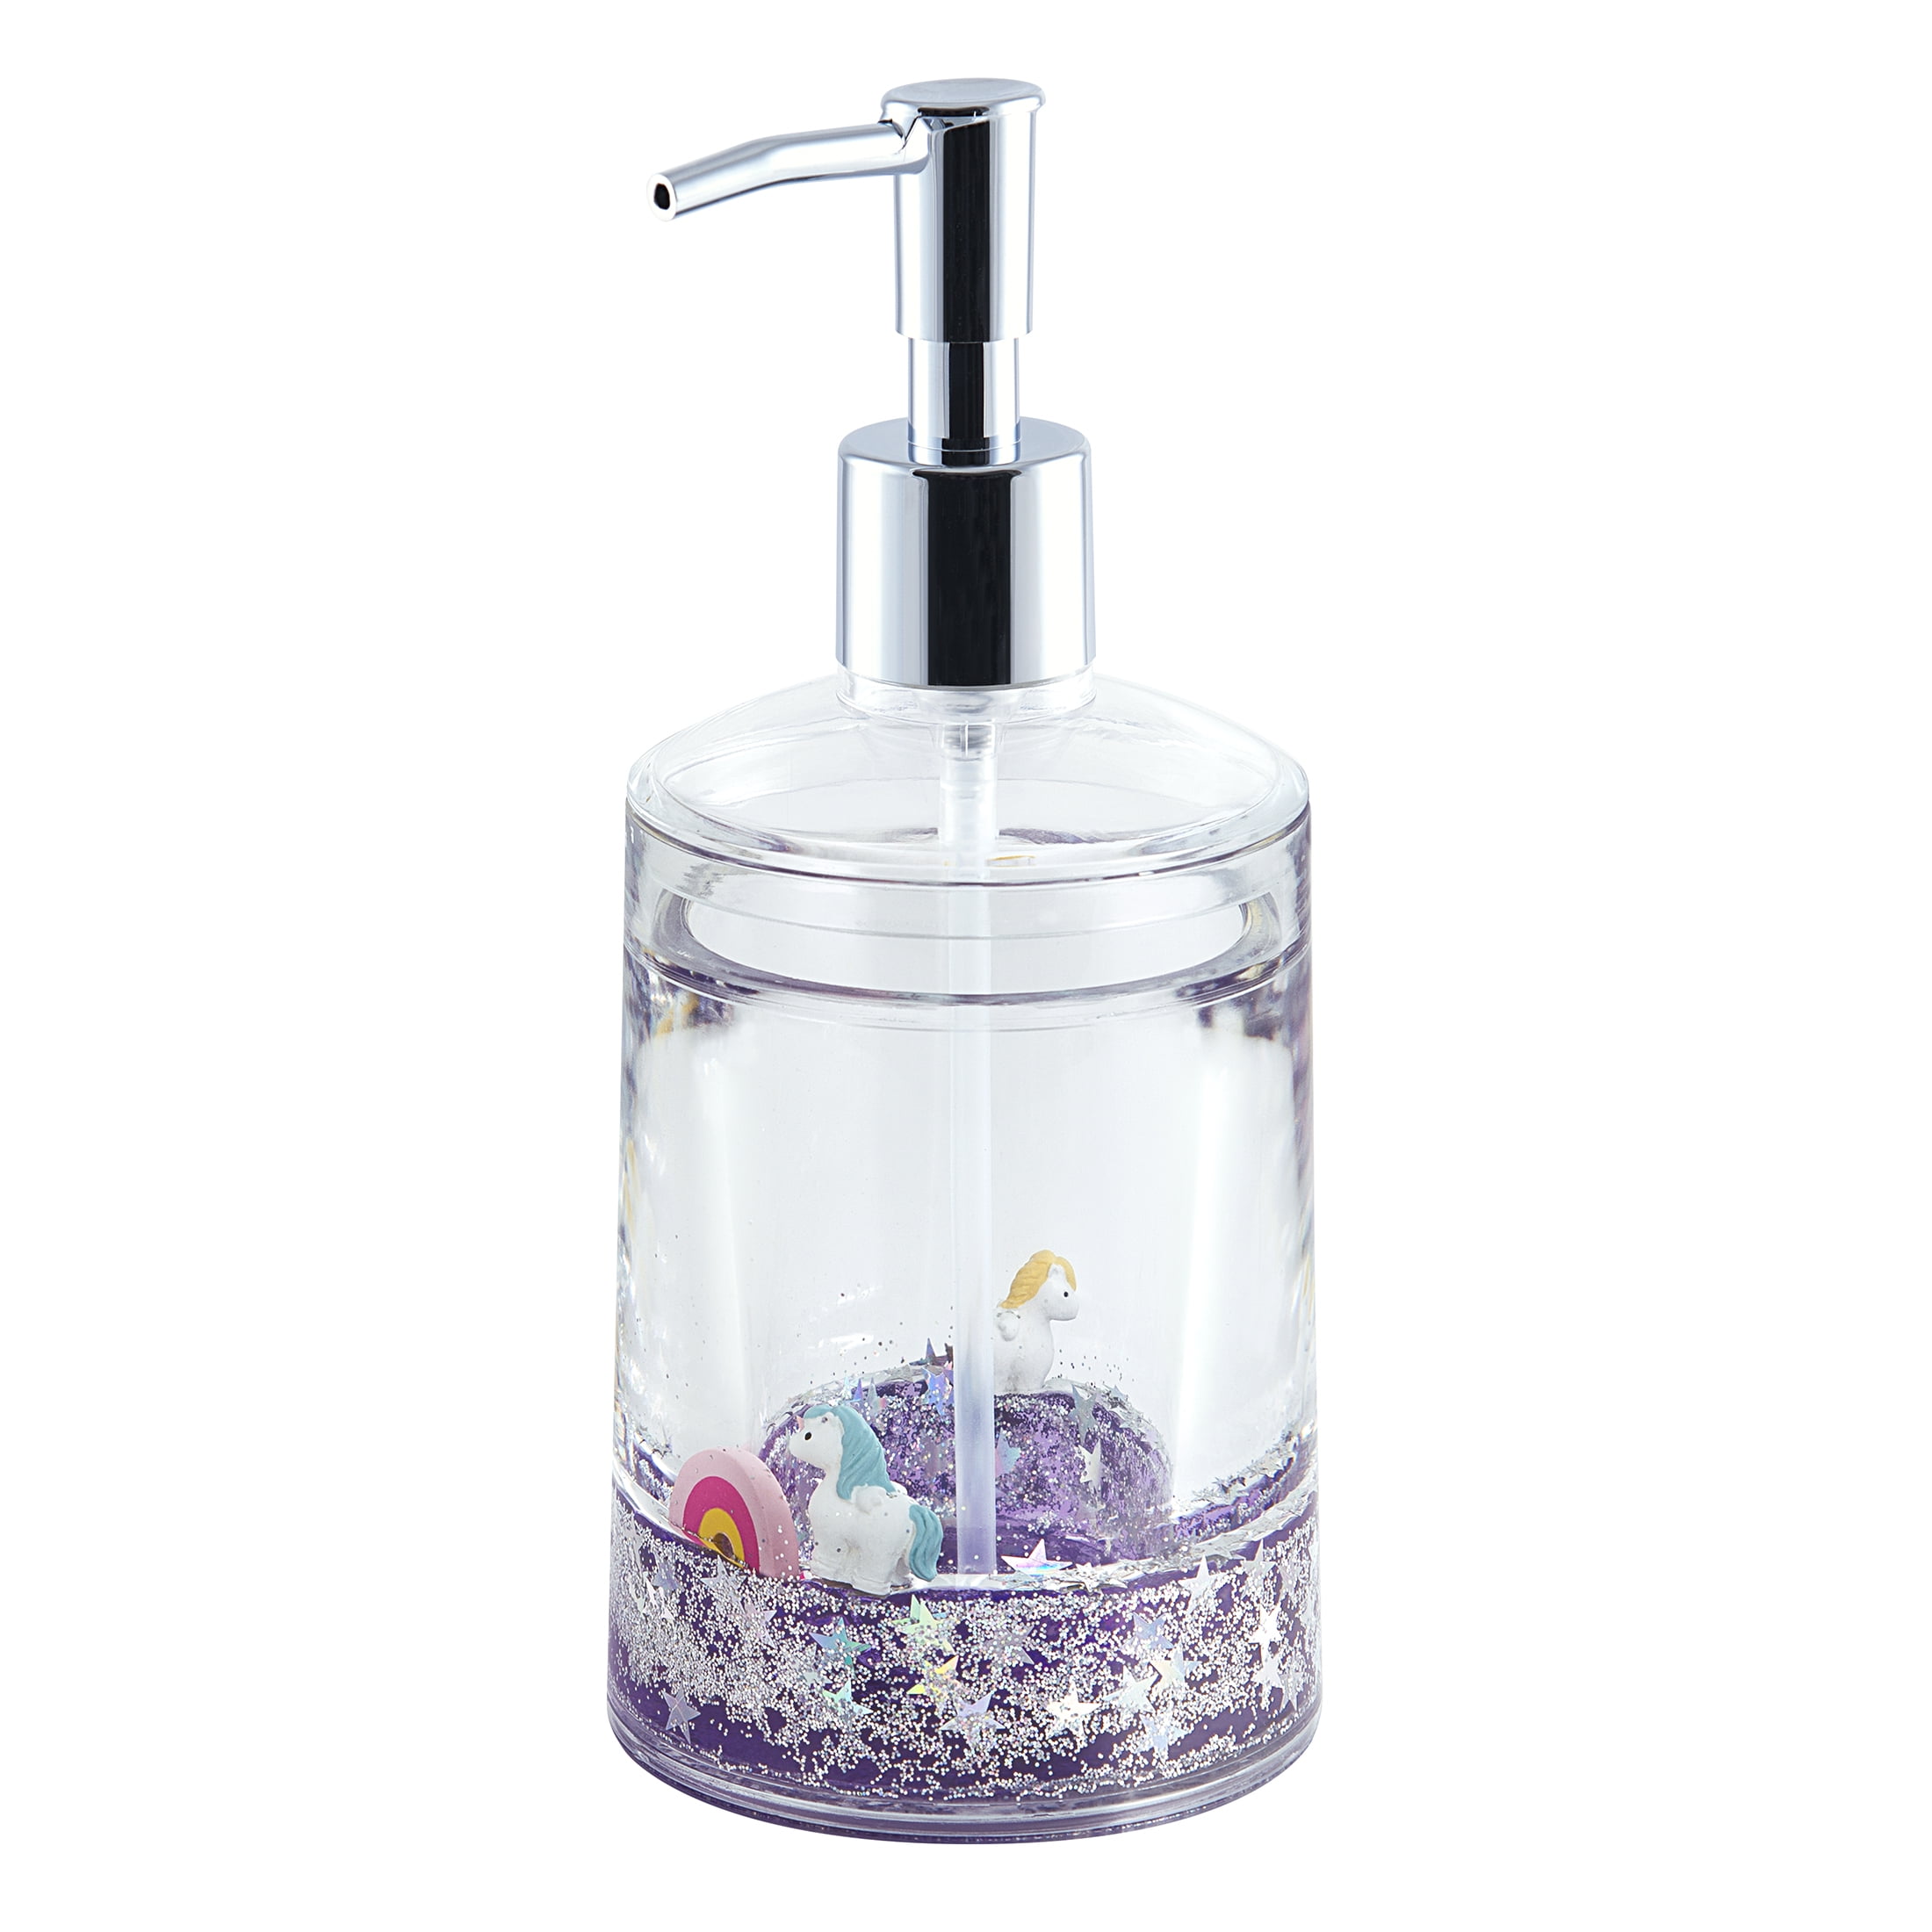 Unicorn Clear Plastic Floatie Lotion Pump with Glitter by Your Zone, Multi